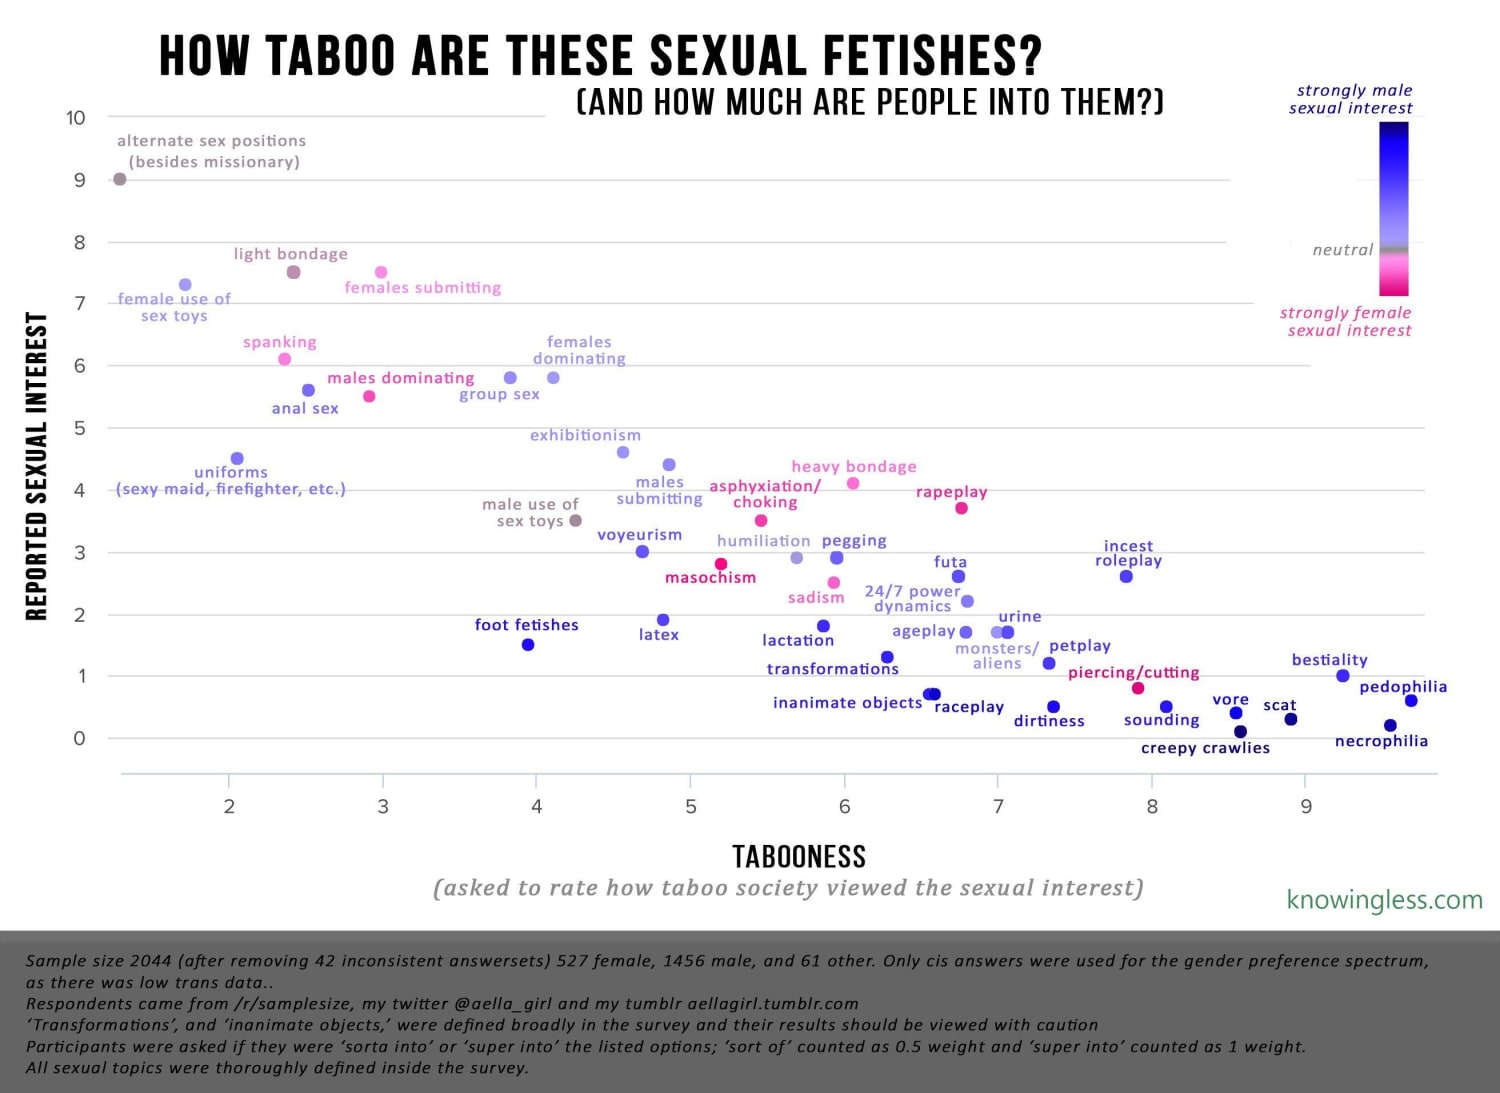 Sexual fetishes and their degree of taboo. Based on 2044 participants.